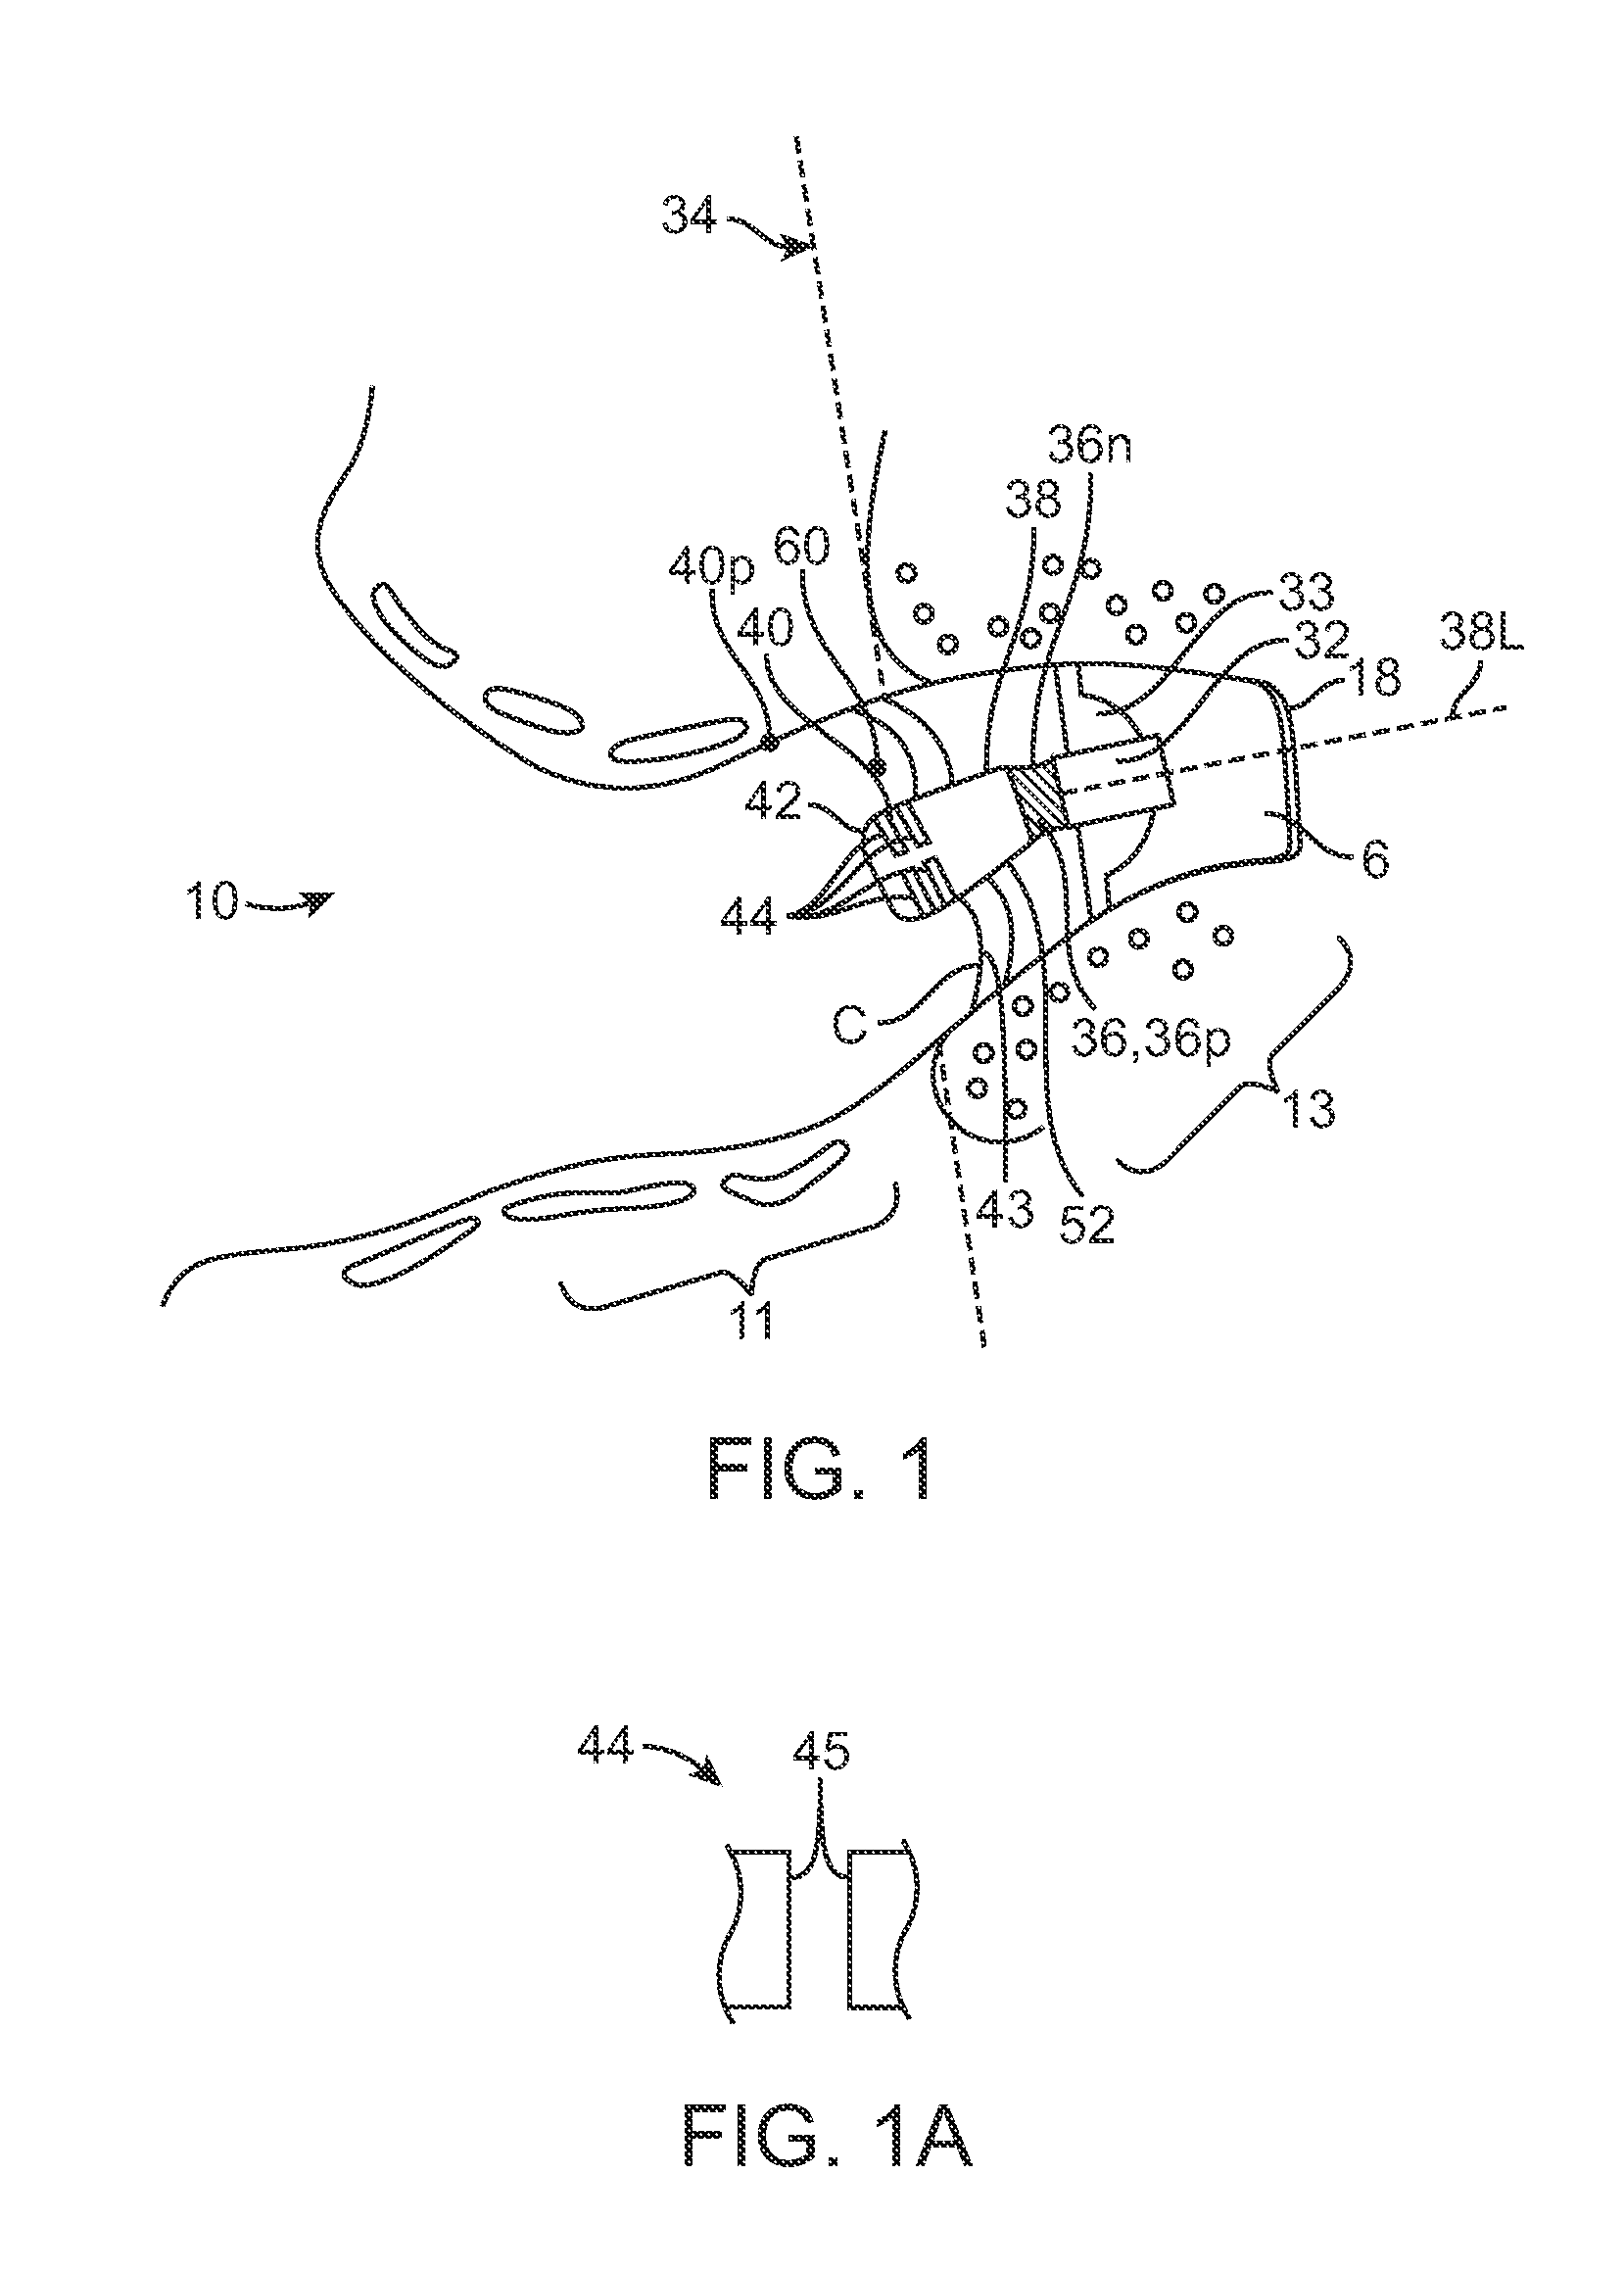 Contamination resistant ports for hearing devices